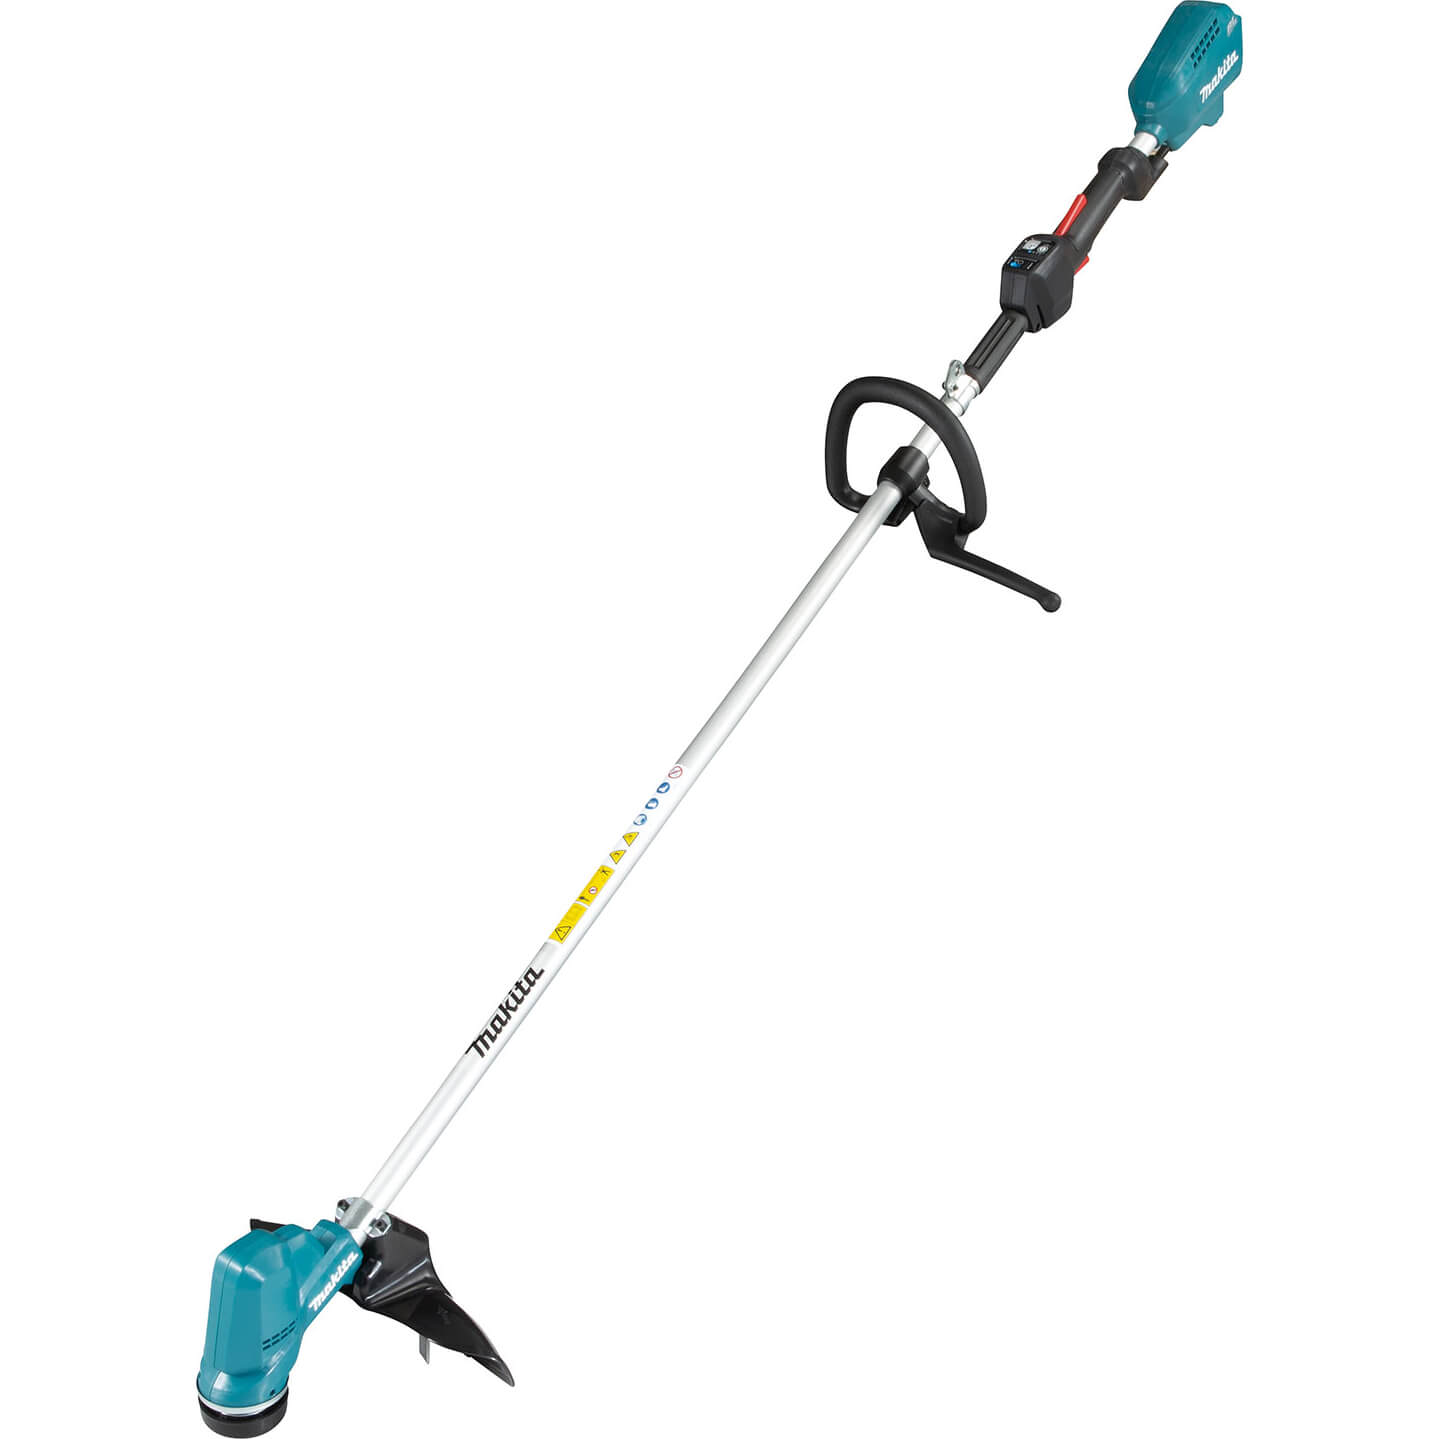 Makita DUR190L 18v LXT Cordless Brushless Grass Trimmer 300mm No Batteries No Charger